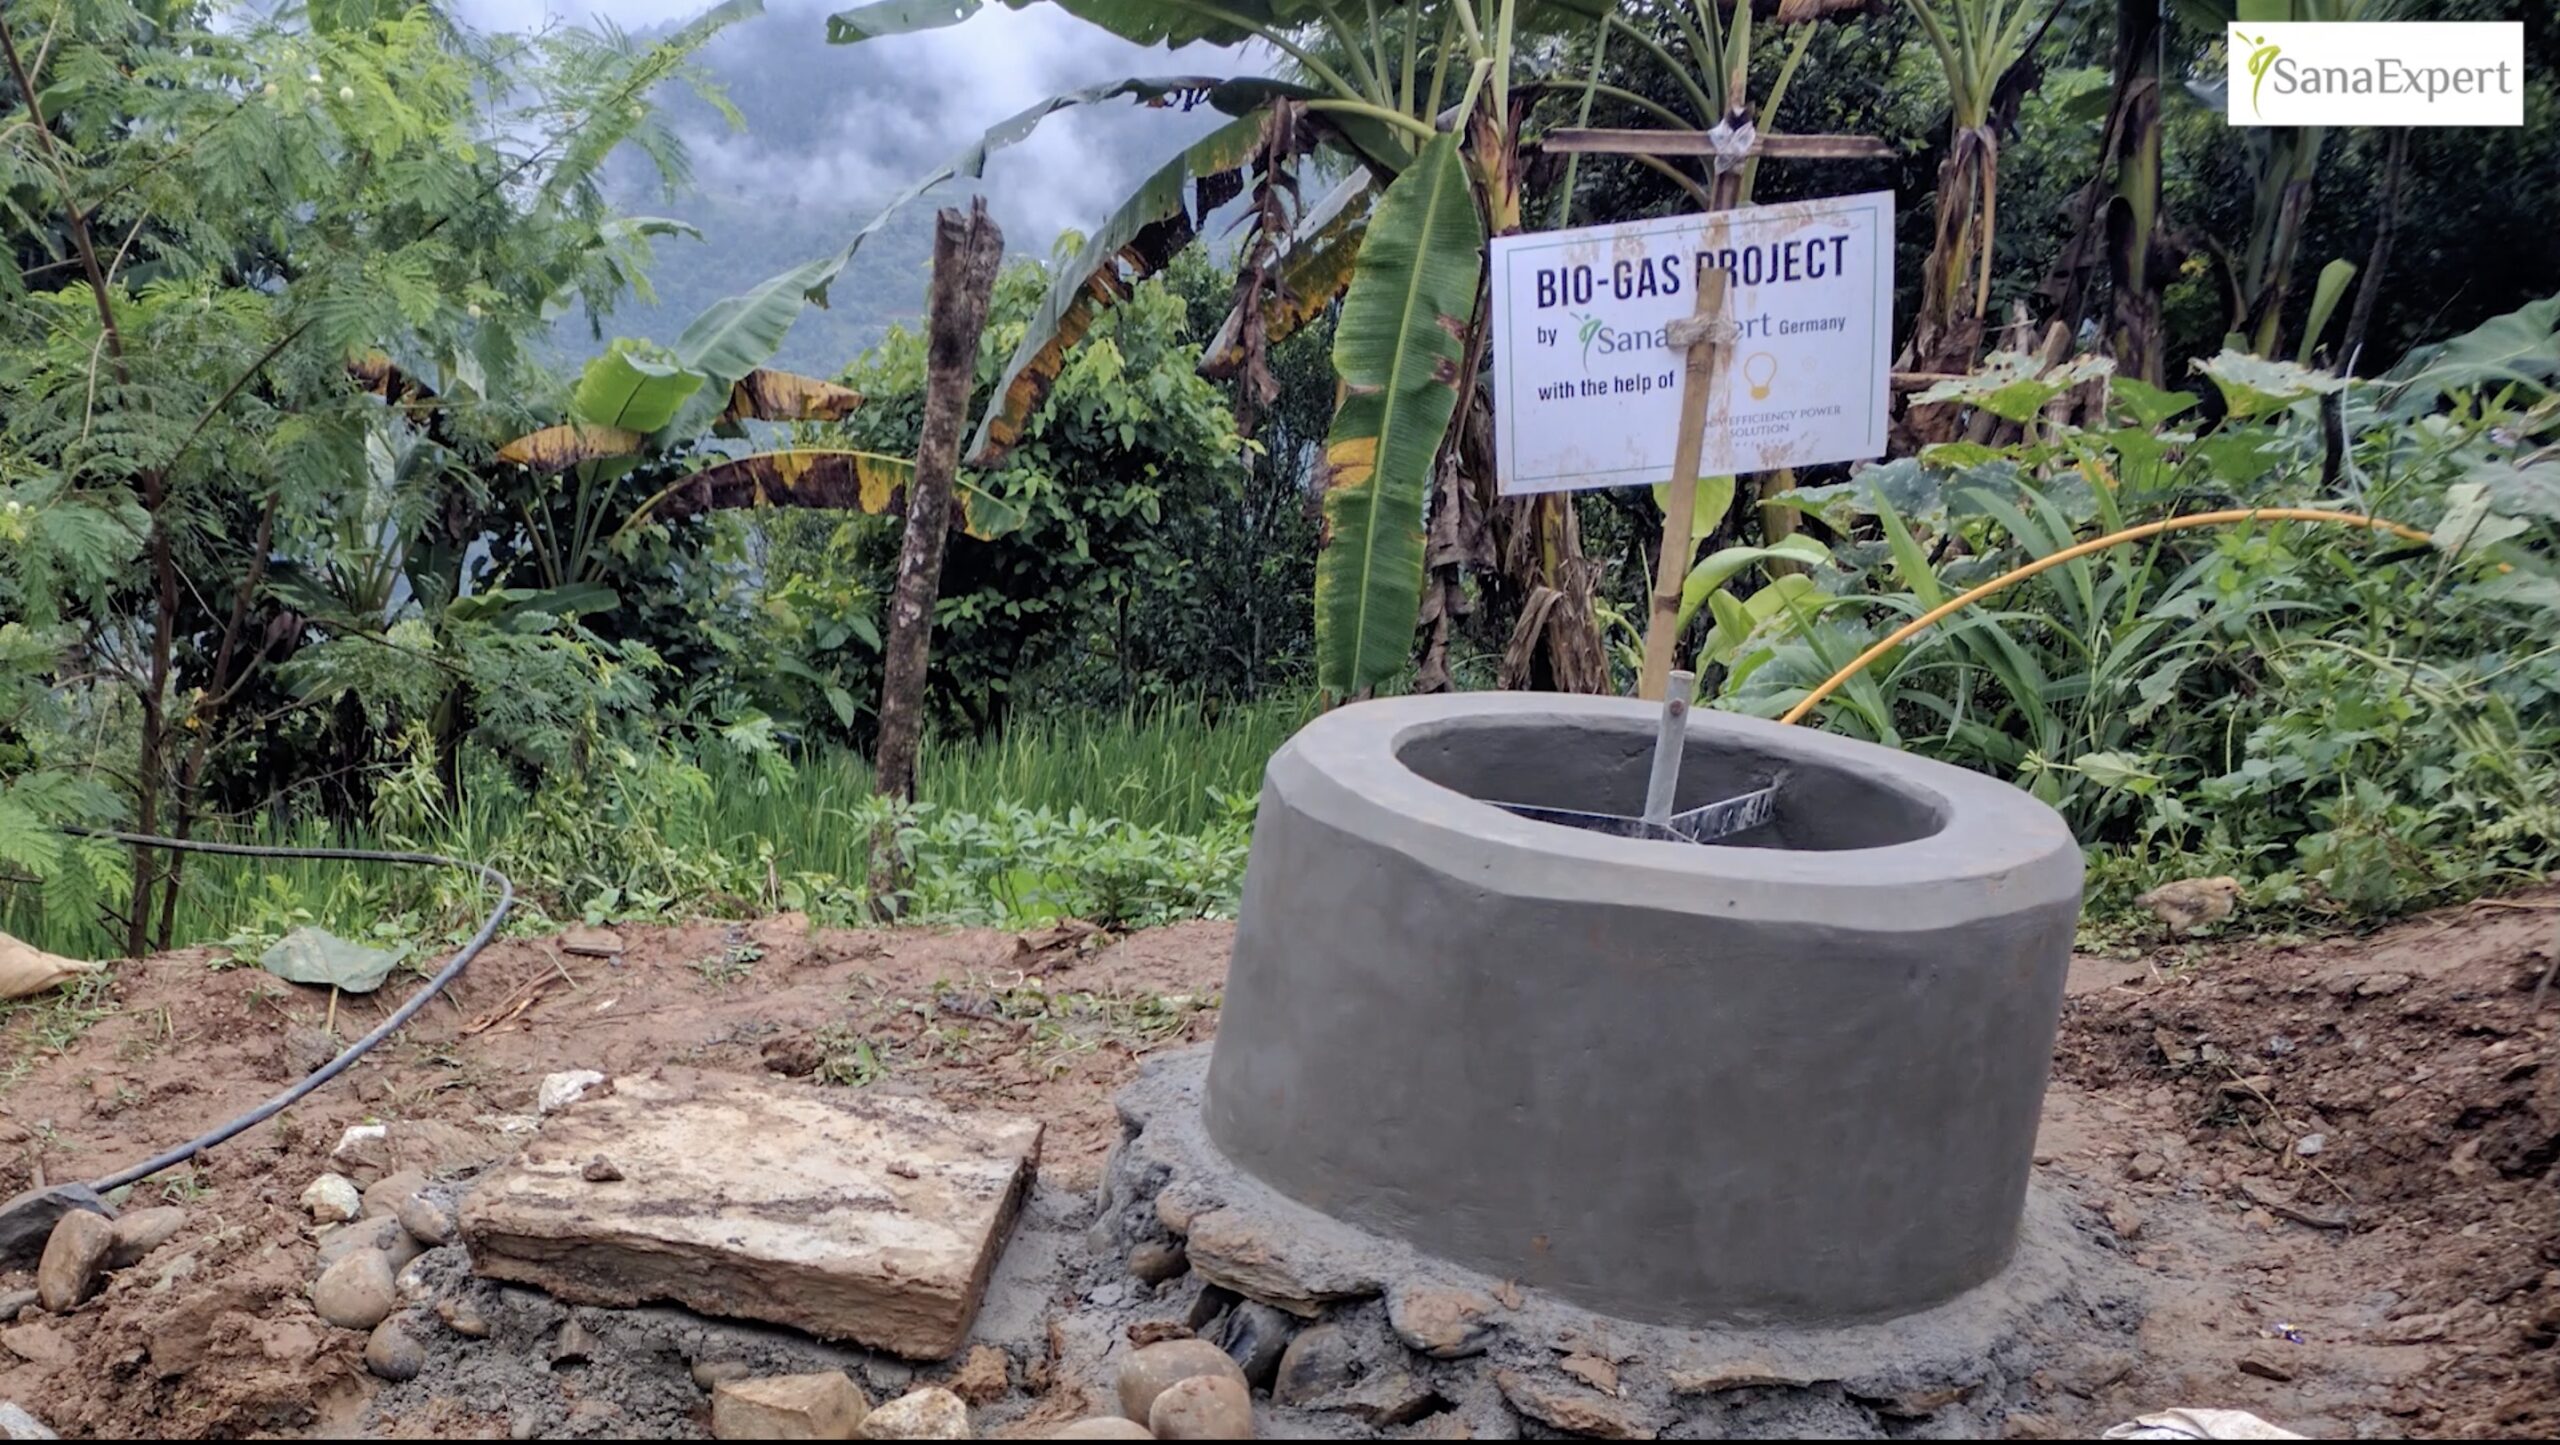 Second Biogas Project Nepal